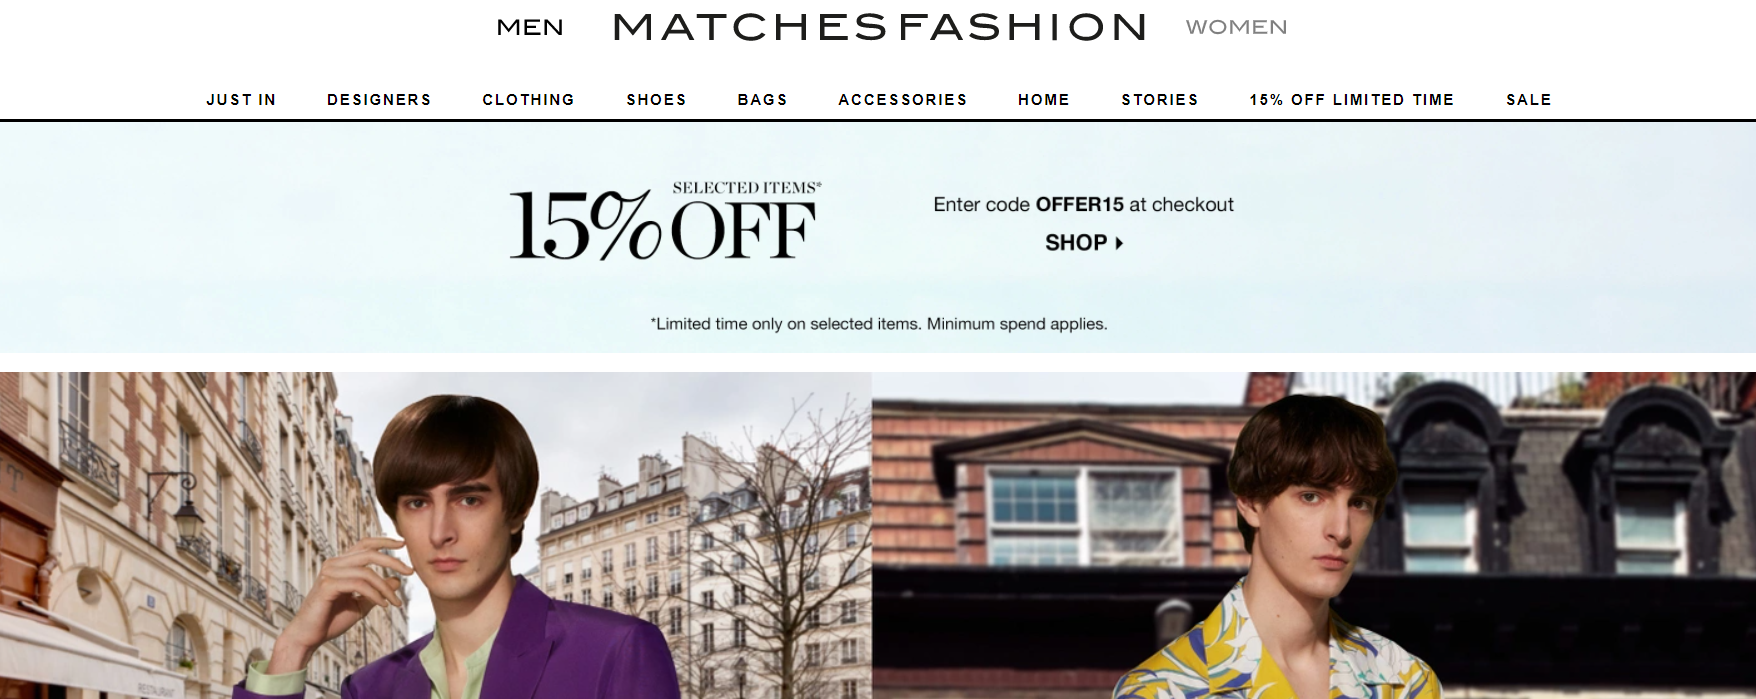 Matches Fashion extra 15% OFF on selected items with promo code(min. spend 600 AUD)